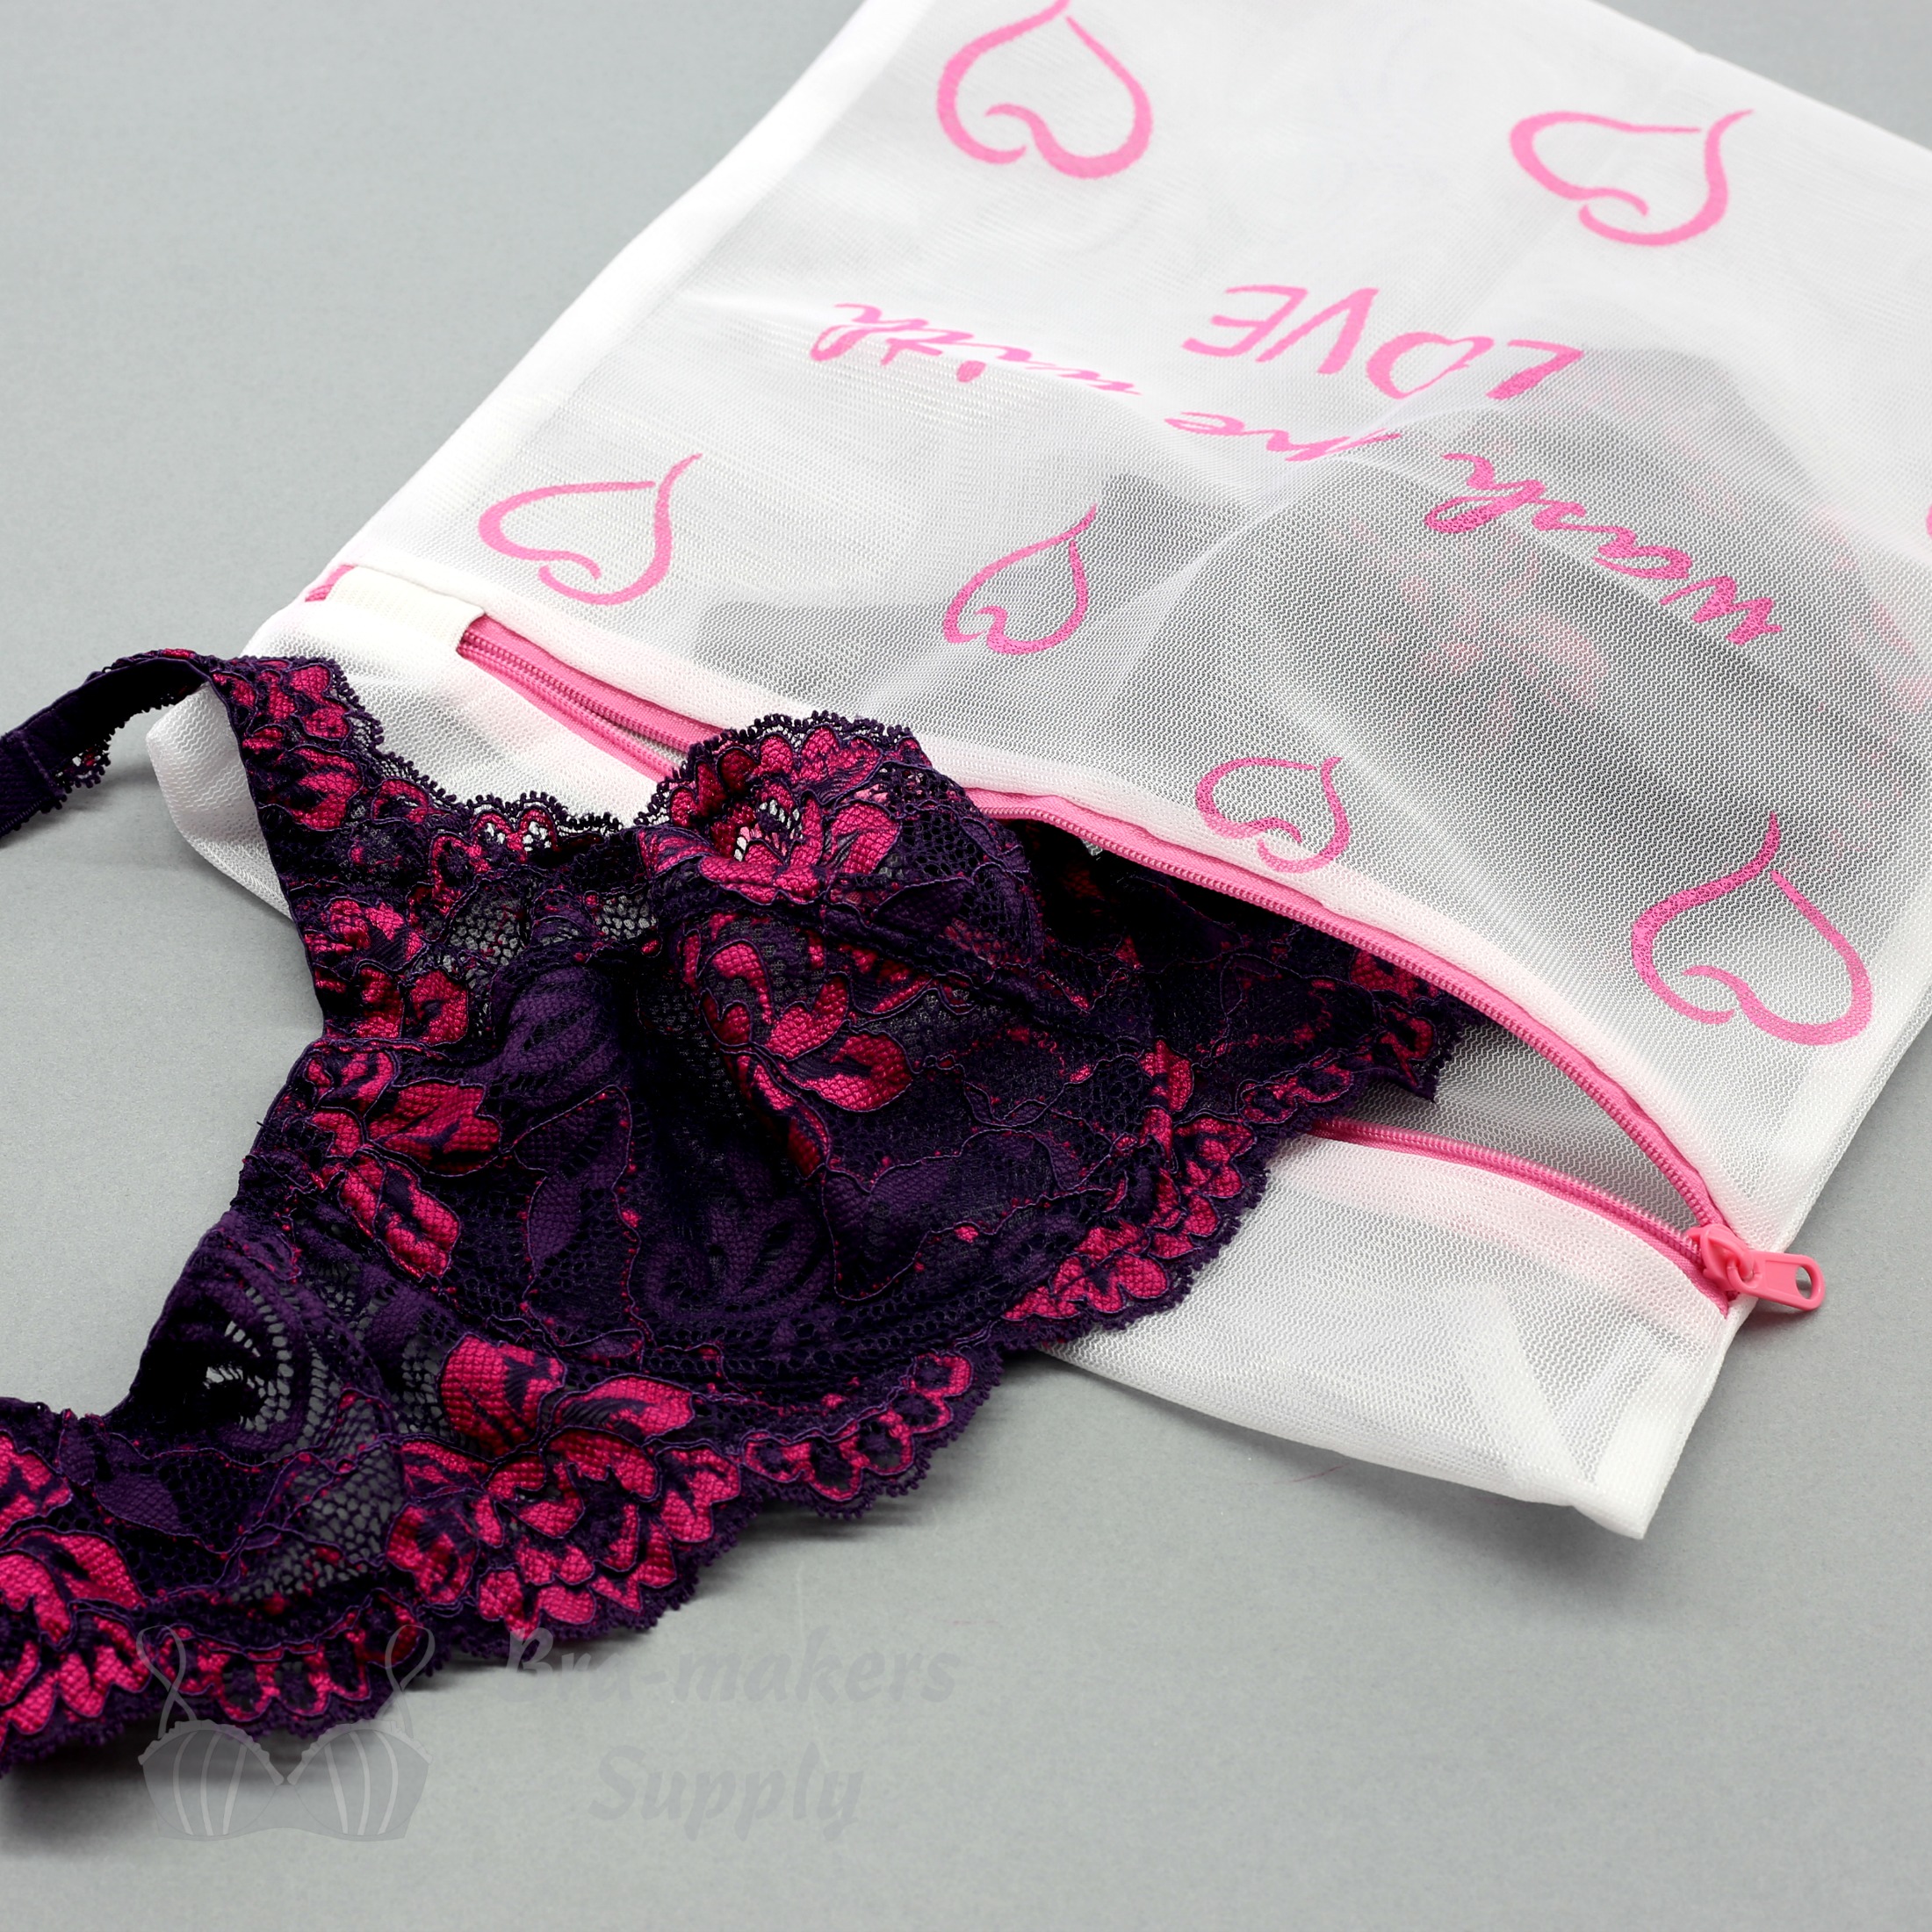 Lingerie, Bra Fine Mesh Wash Bag for Underwear Details about   Kimmama Delicates Laundry Bags 